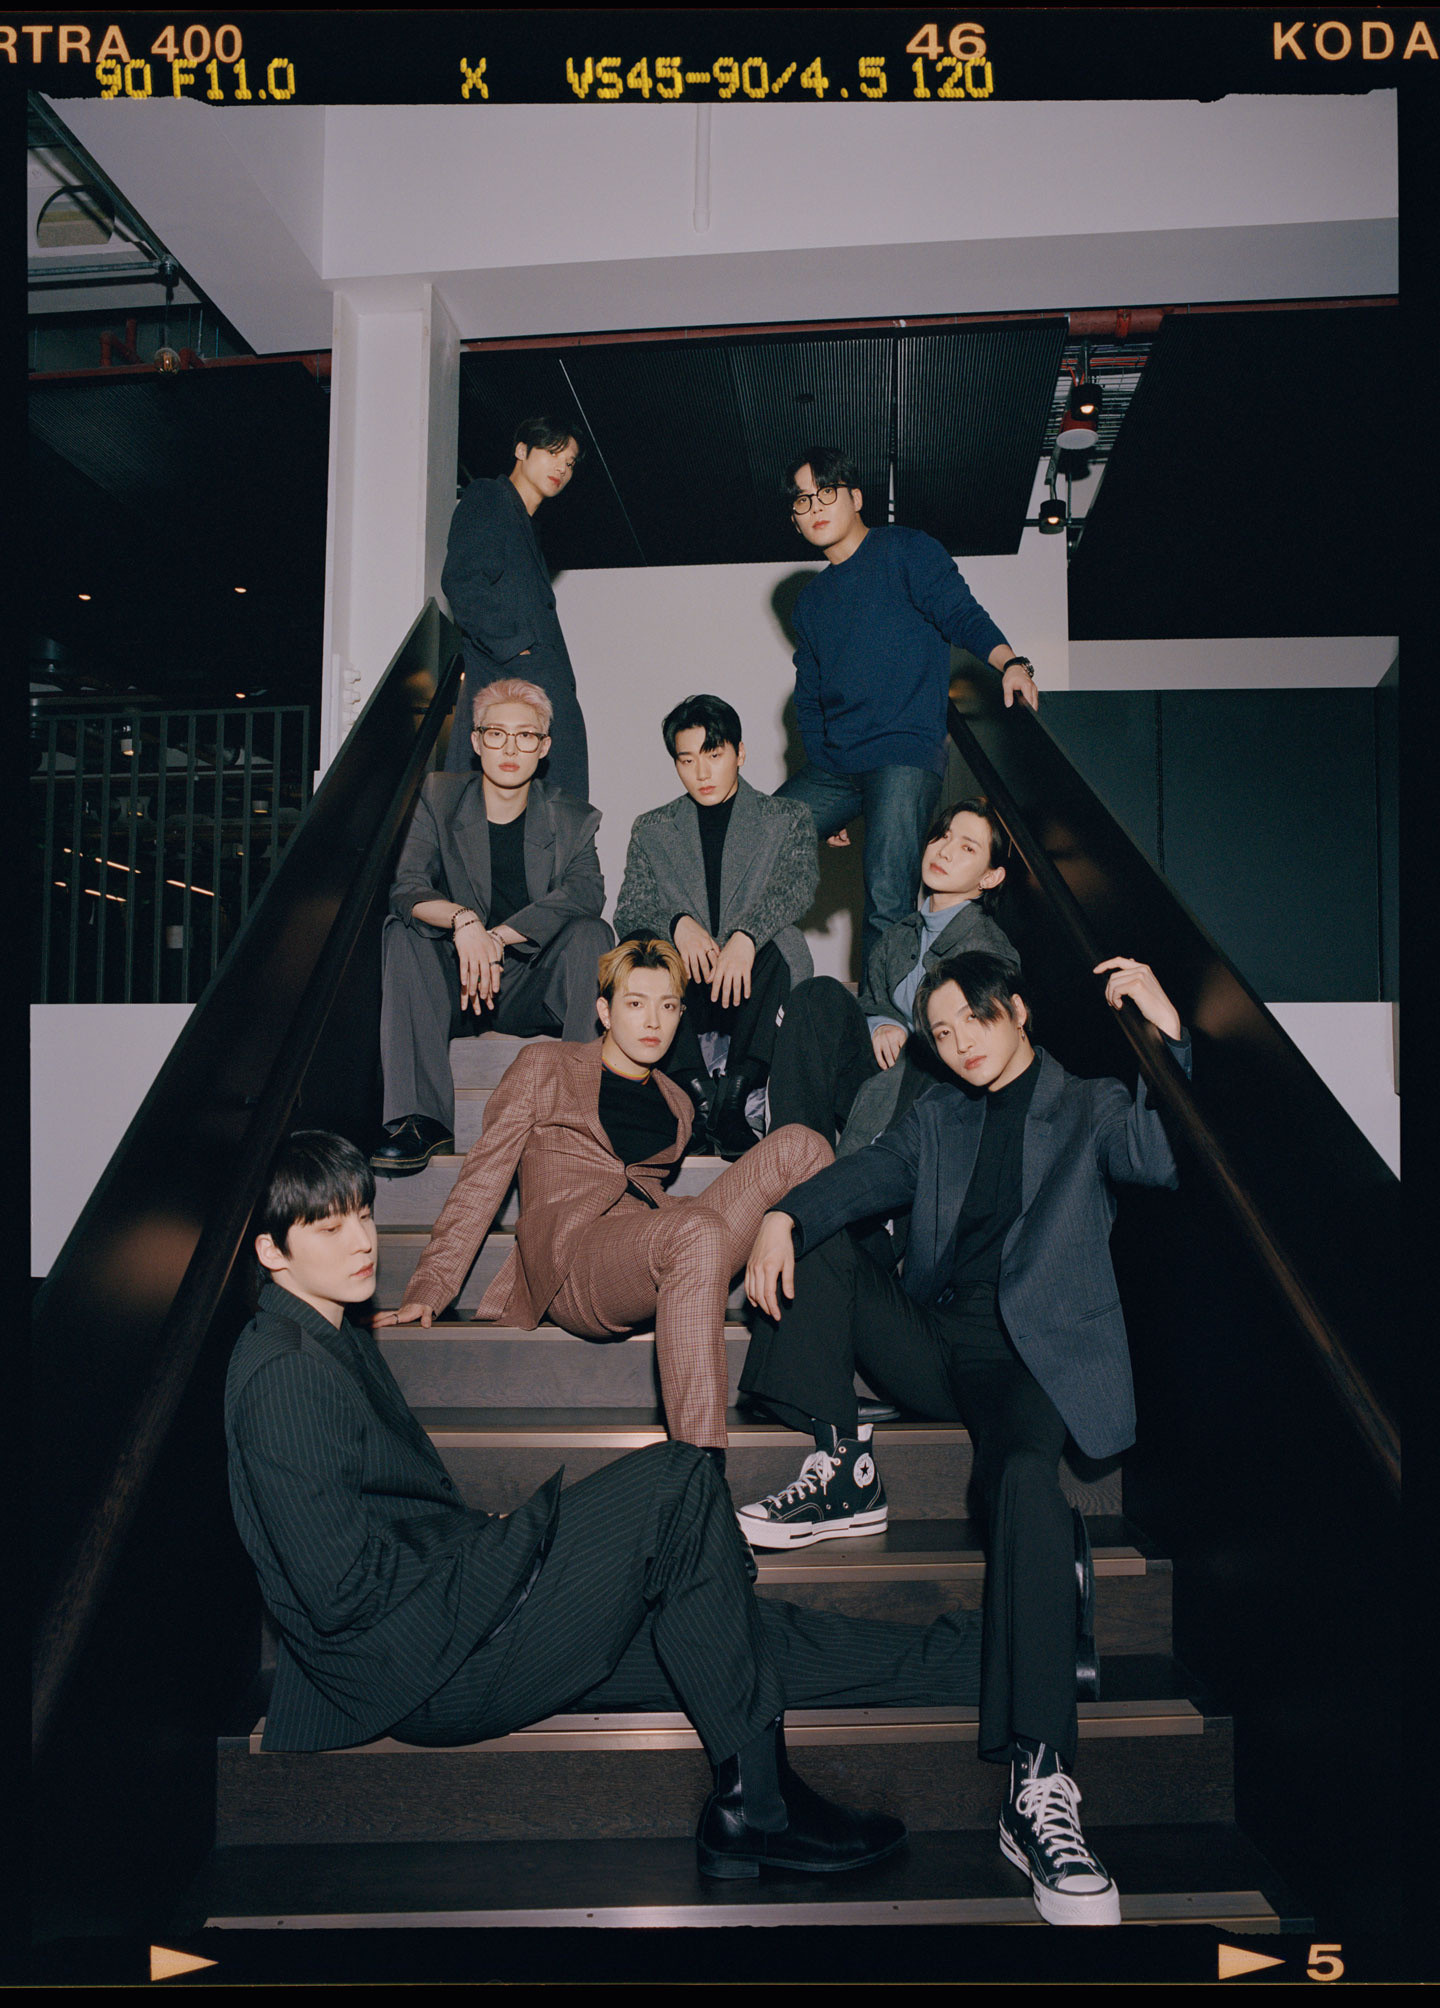 ATEEZ gather in a group, posing on a staircase wearing suits and looking to camera